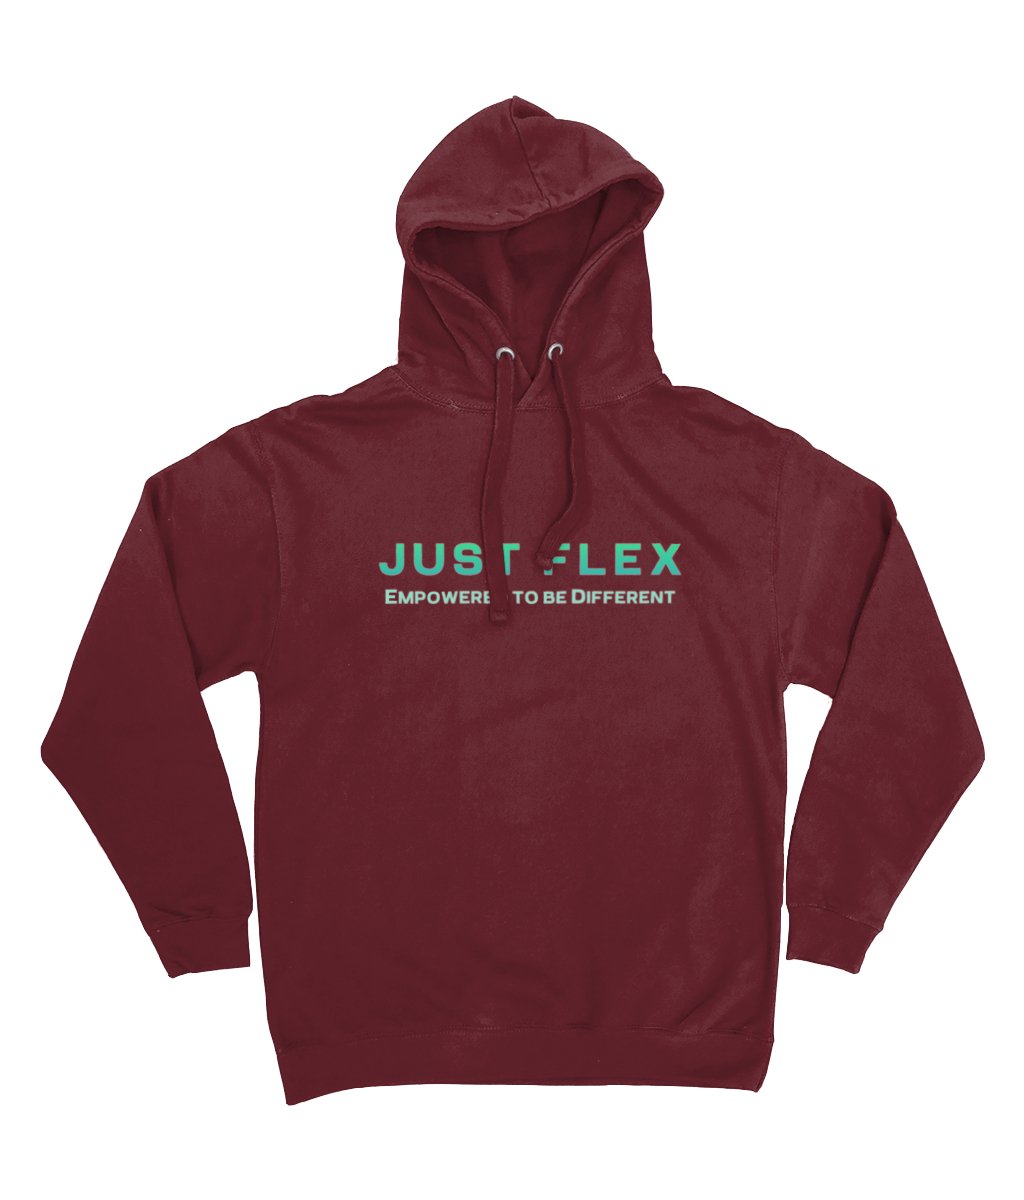 Just Flex - Empowered To Be Different Unisex Epic Print Hoodie